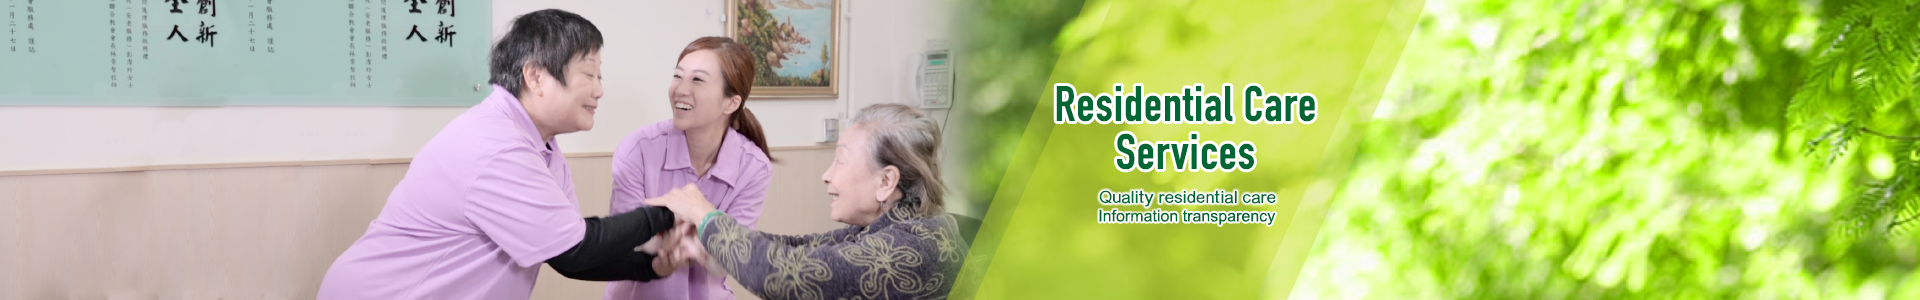 Residential Care Services